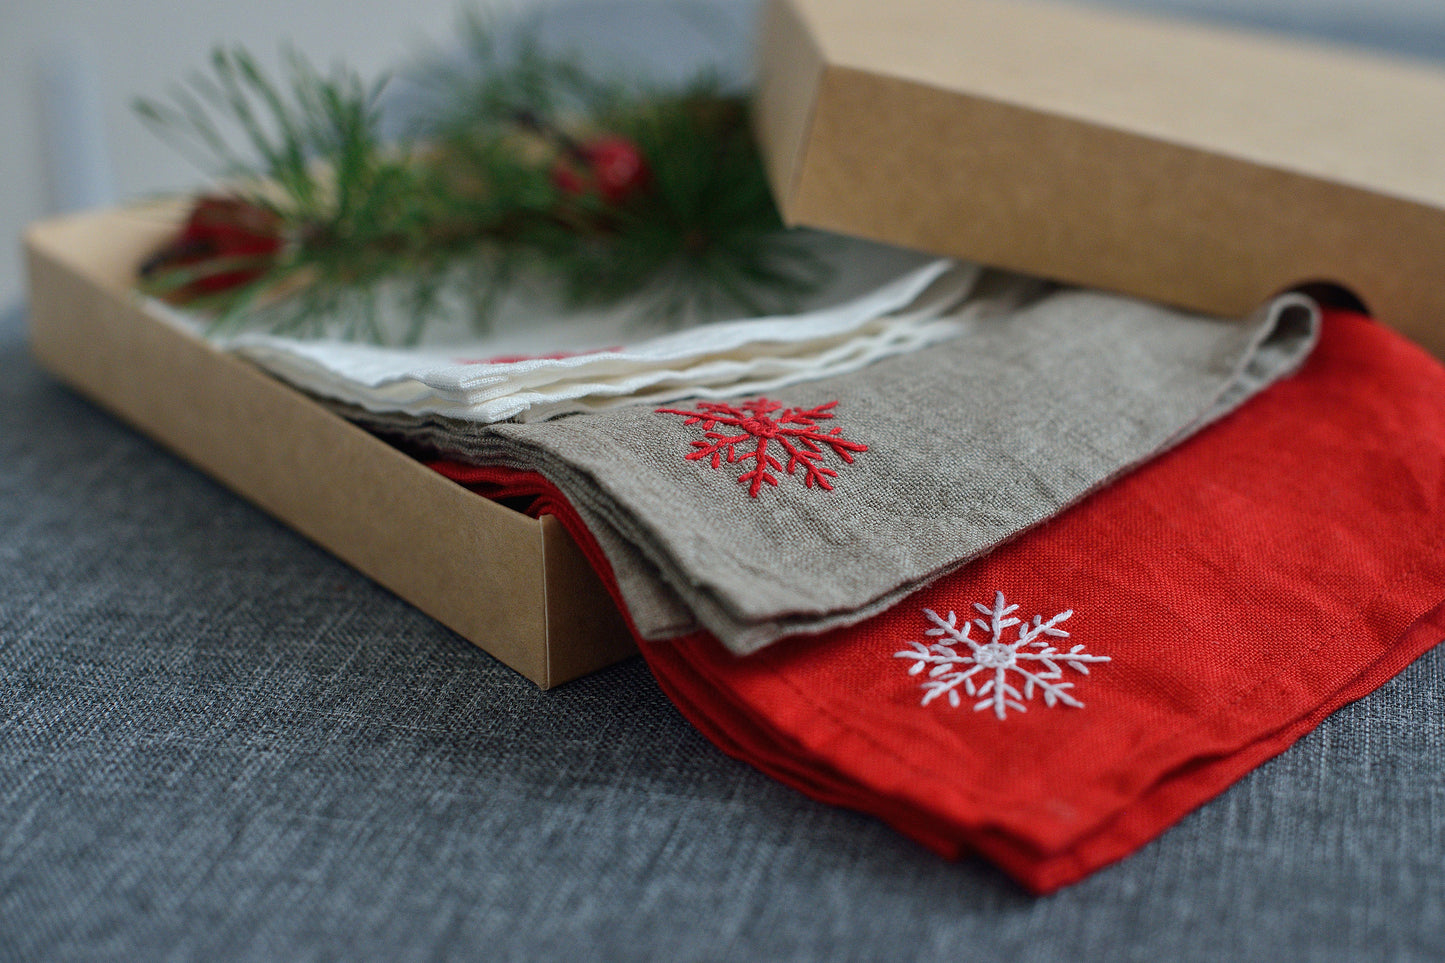 Linen Towel with Handmade Snowflakes Embroidery/ Linen Kitchen Towel Christmas Gift/ Vintage Christmas Linen/ Linen Gift Luxury